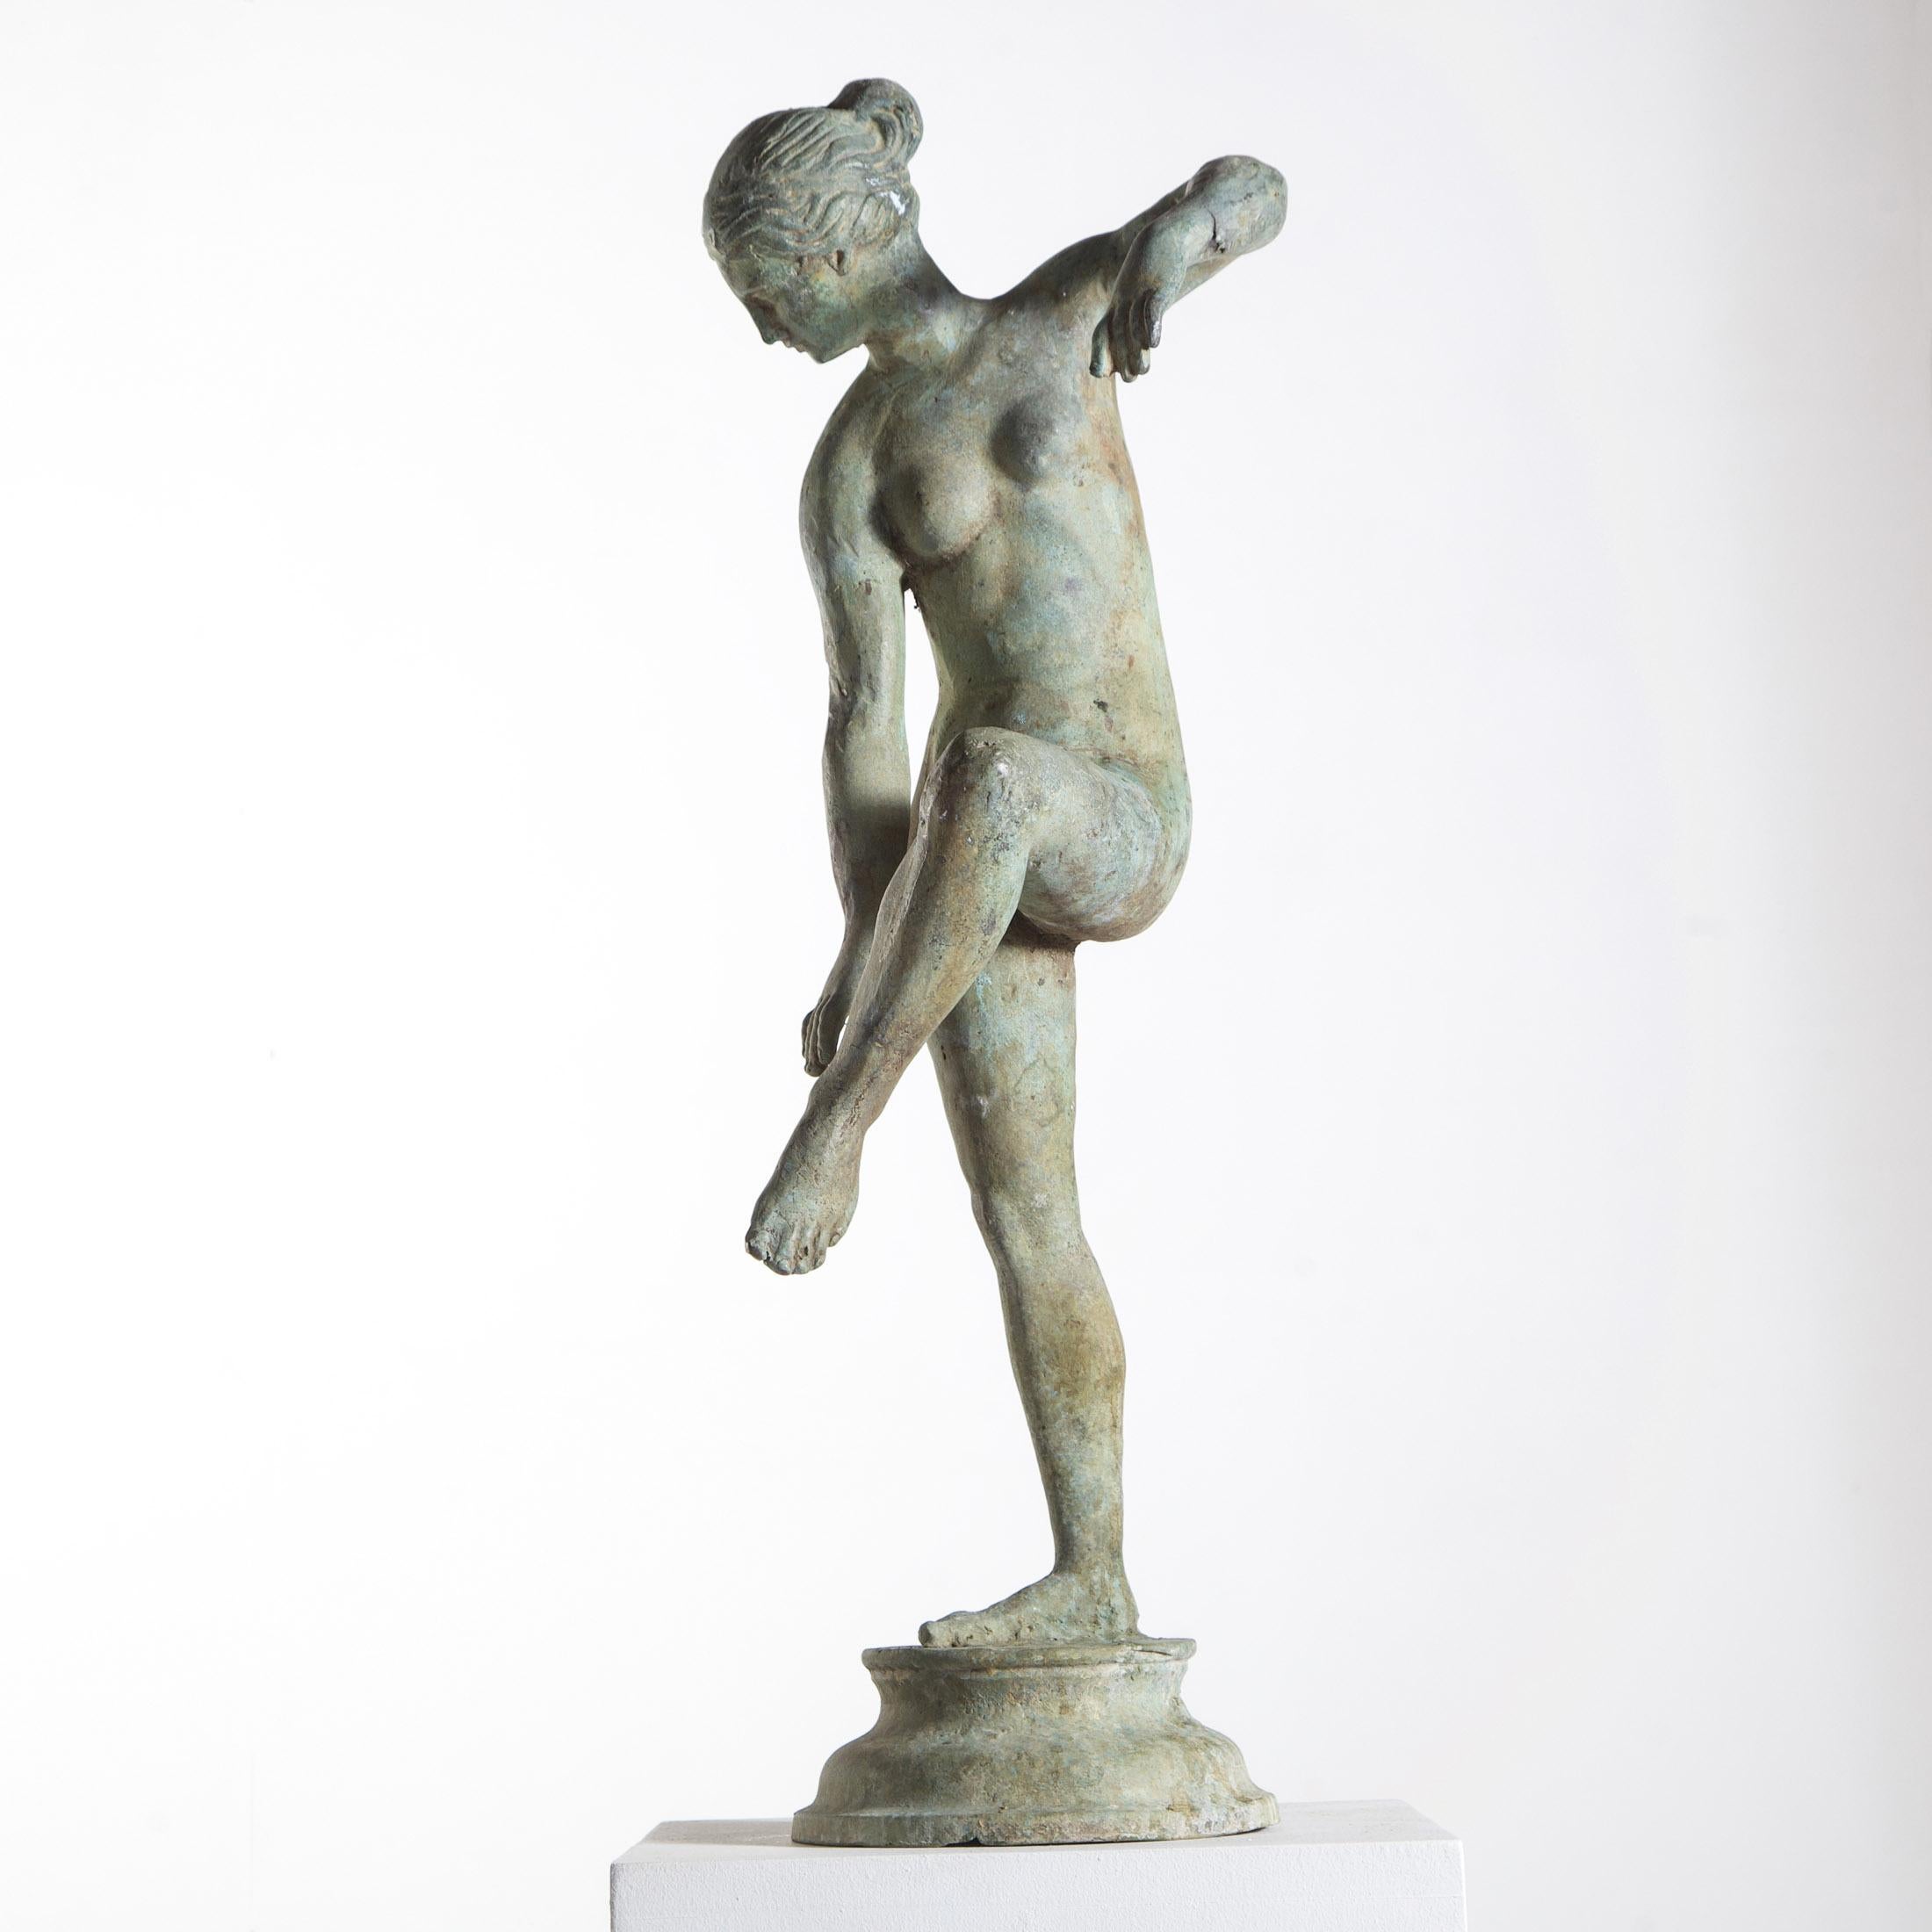 Late 19th or Early 20th Century Statue of Venus. Italy, Circa 1900. Having clearly spent time outside some minor damage and losses, fabulous original verdigris patination.